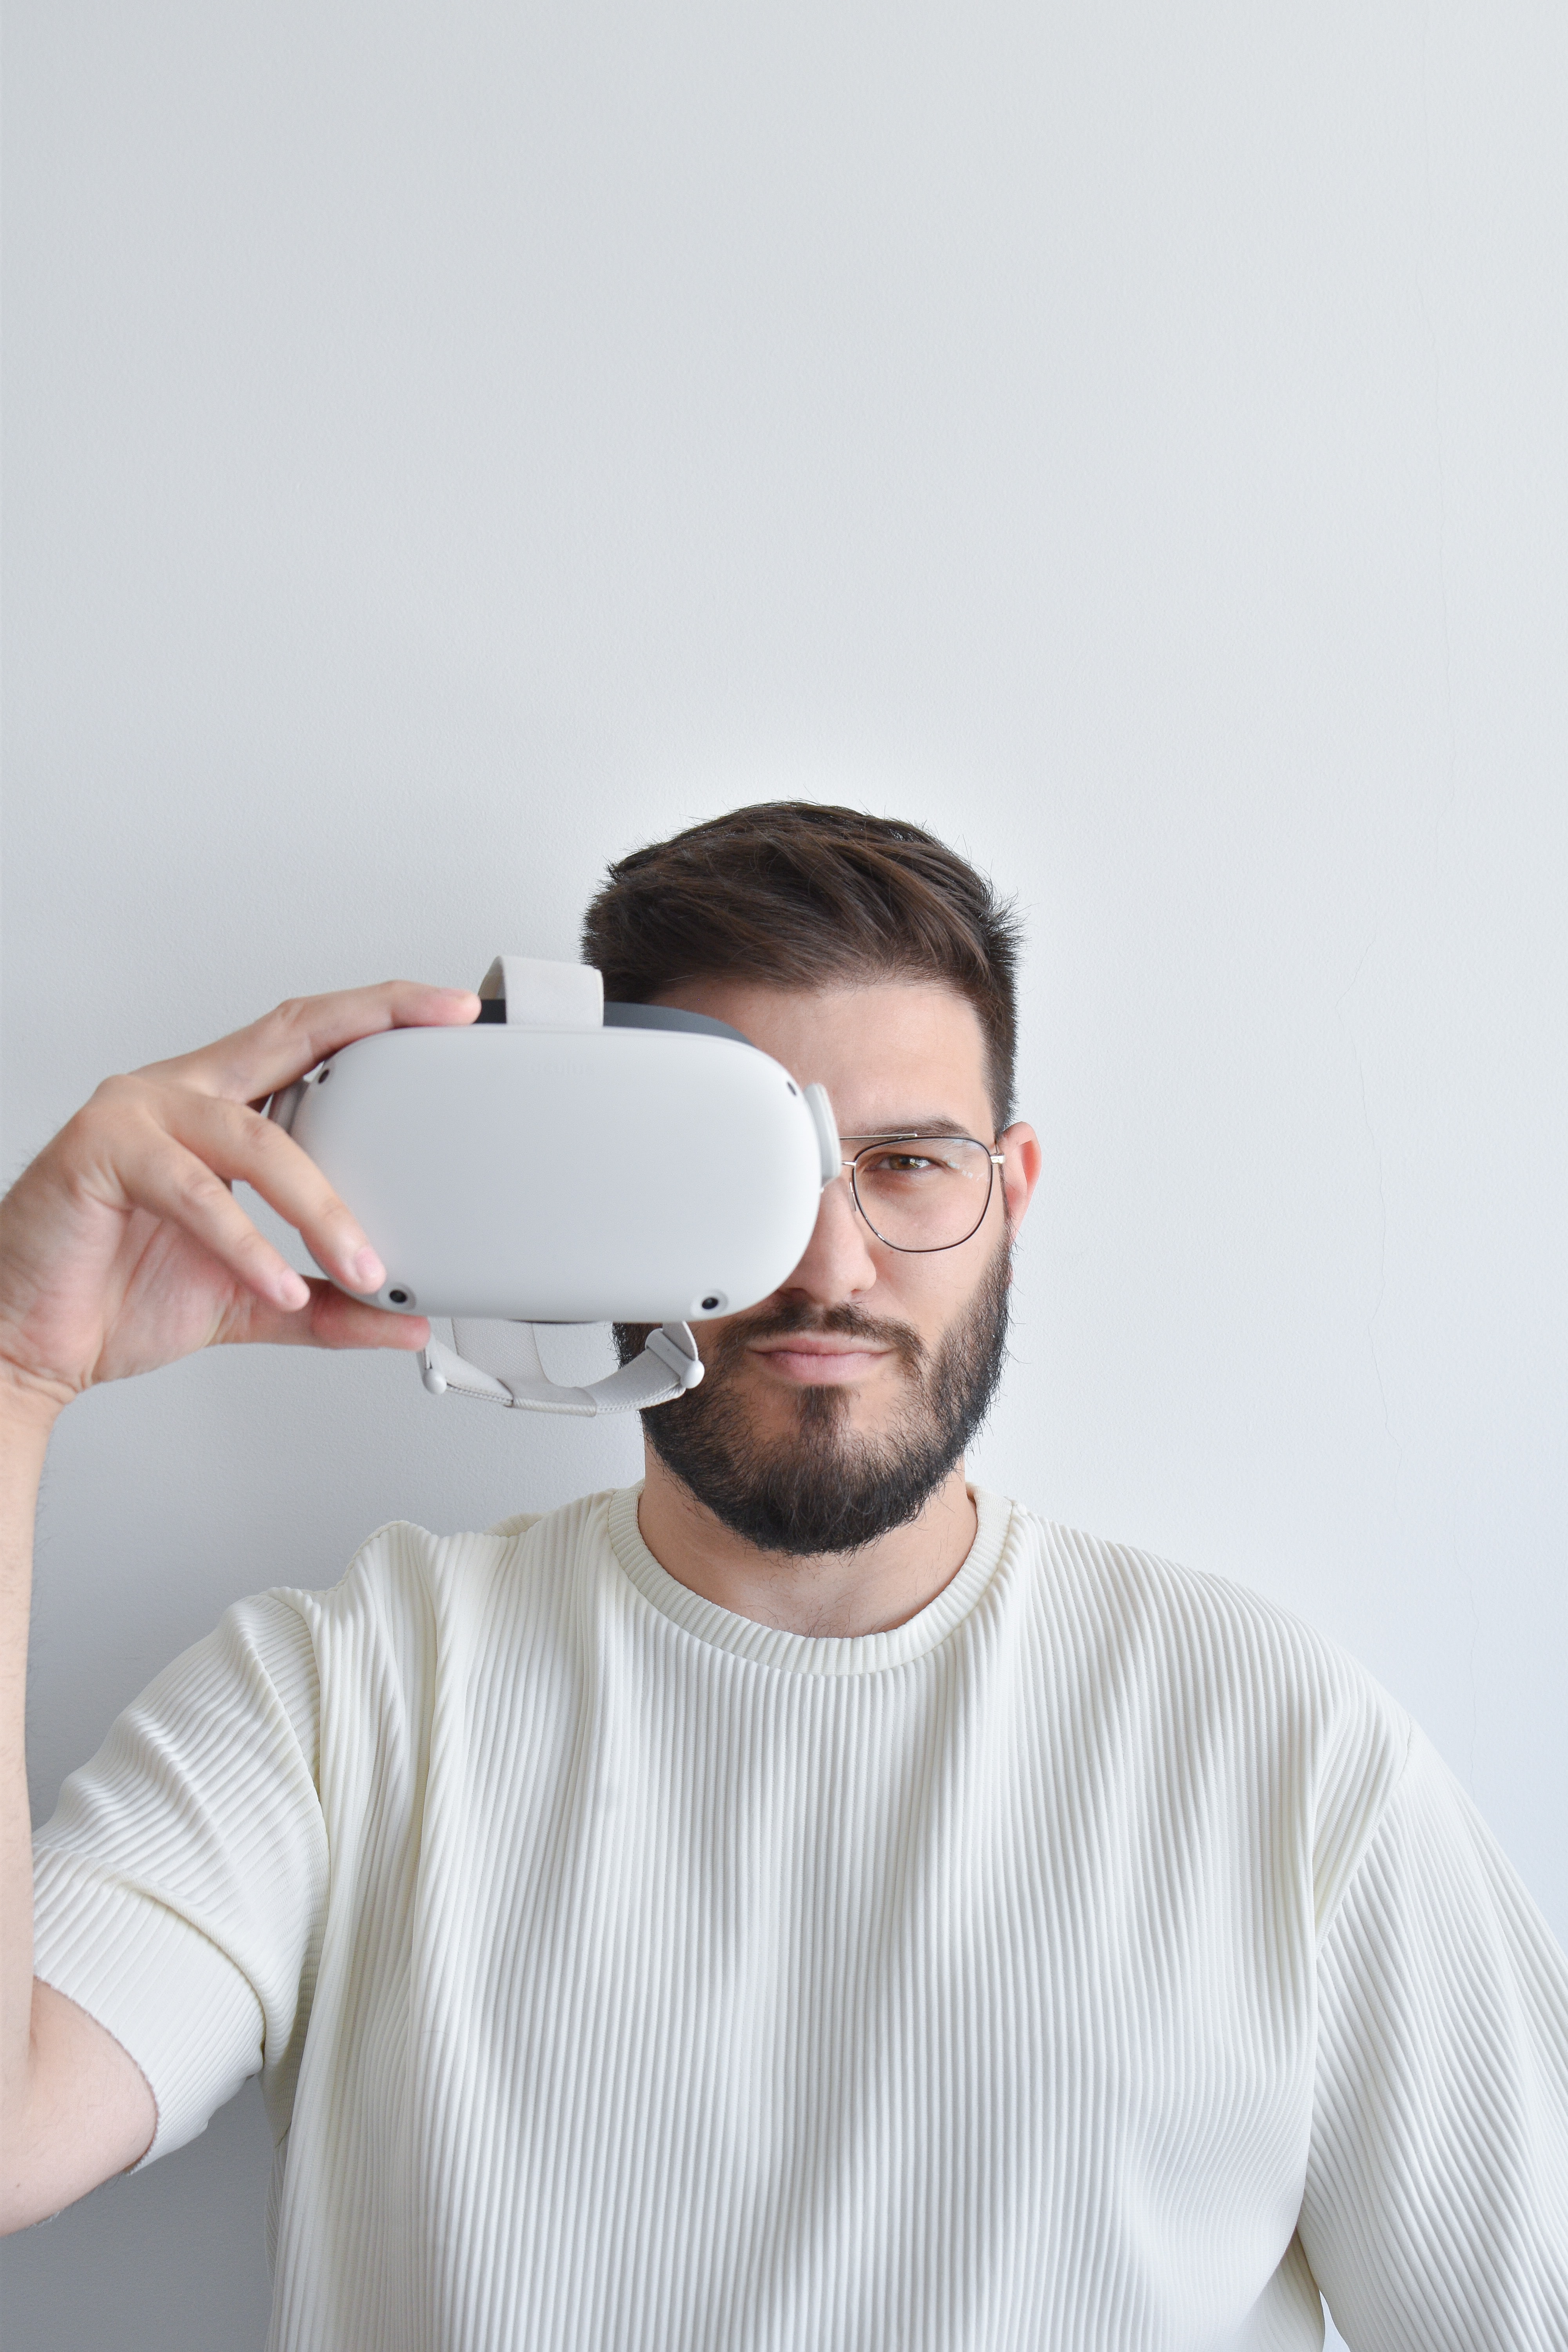 man holding VR headset up to face in front of white background